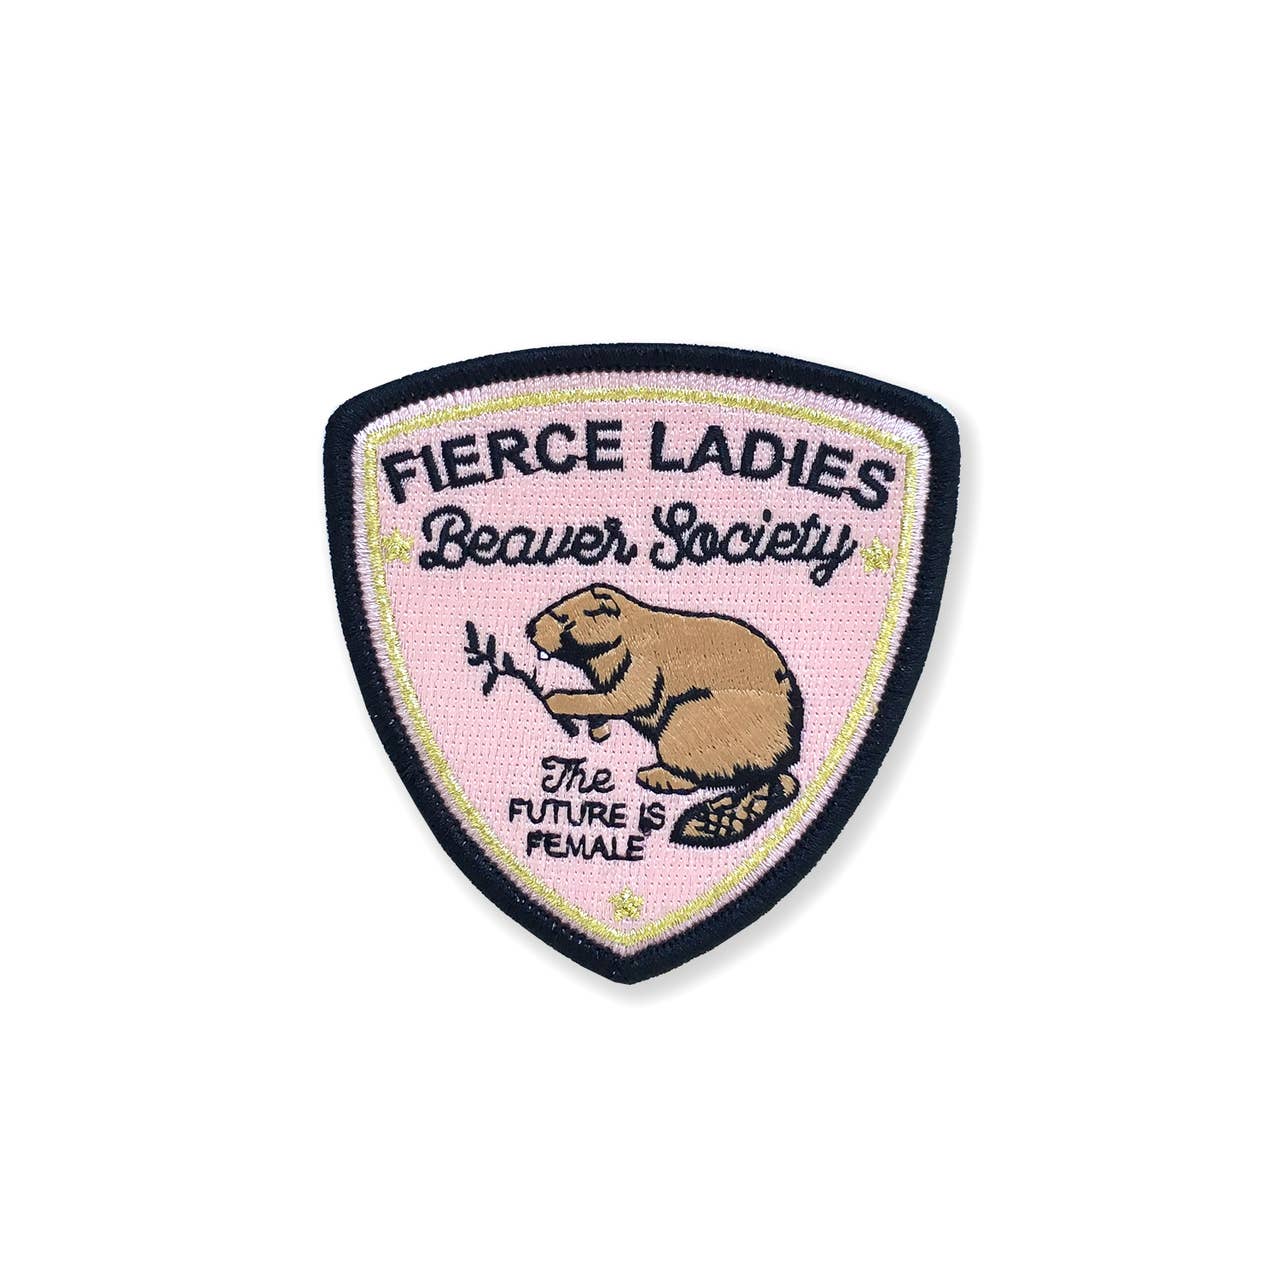 Beaver Society Embroidered Patch